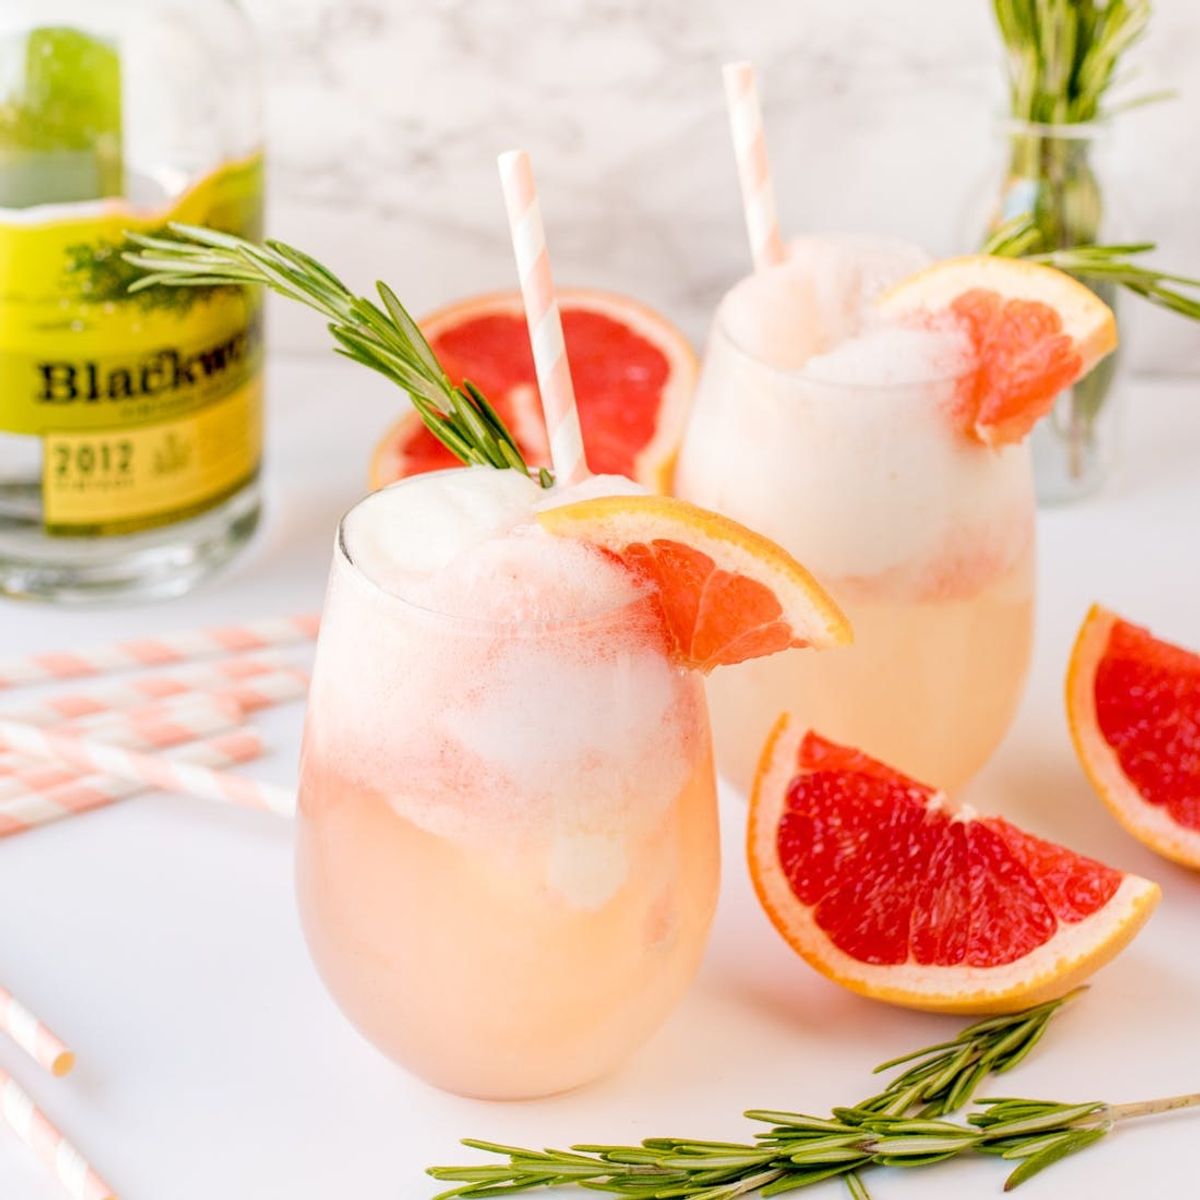 Who Needs Dessert? Try This Gin + Sorbet Cocktail Recipe Instead!